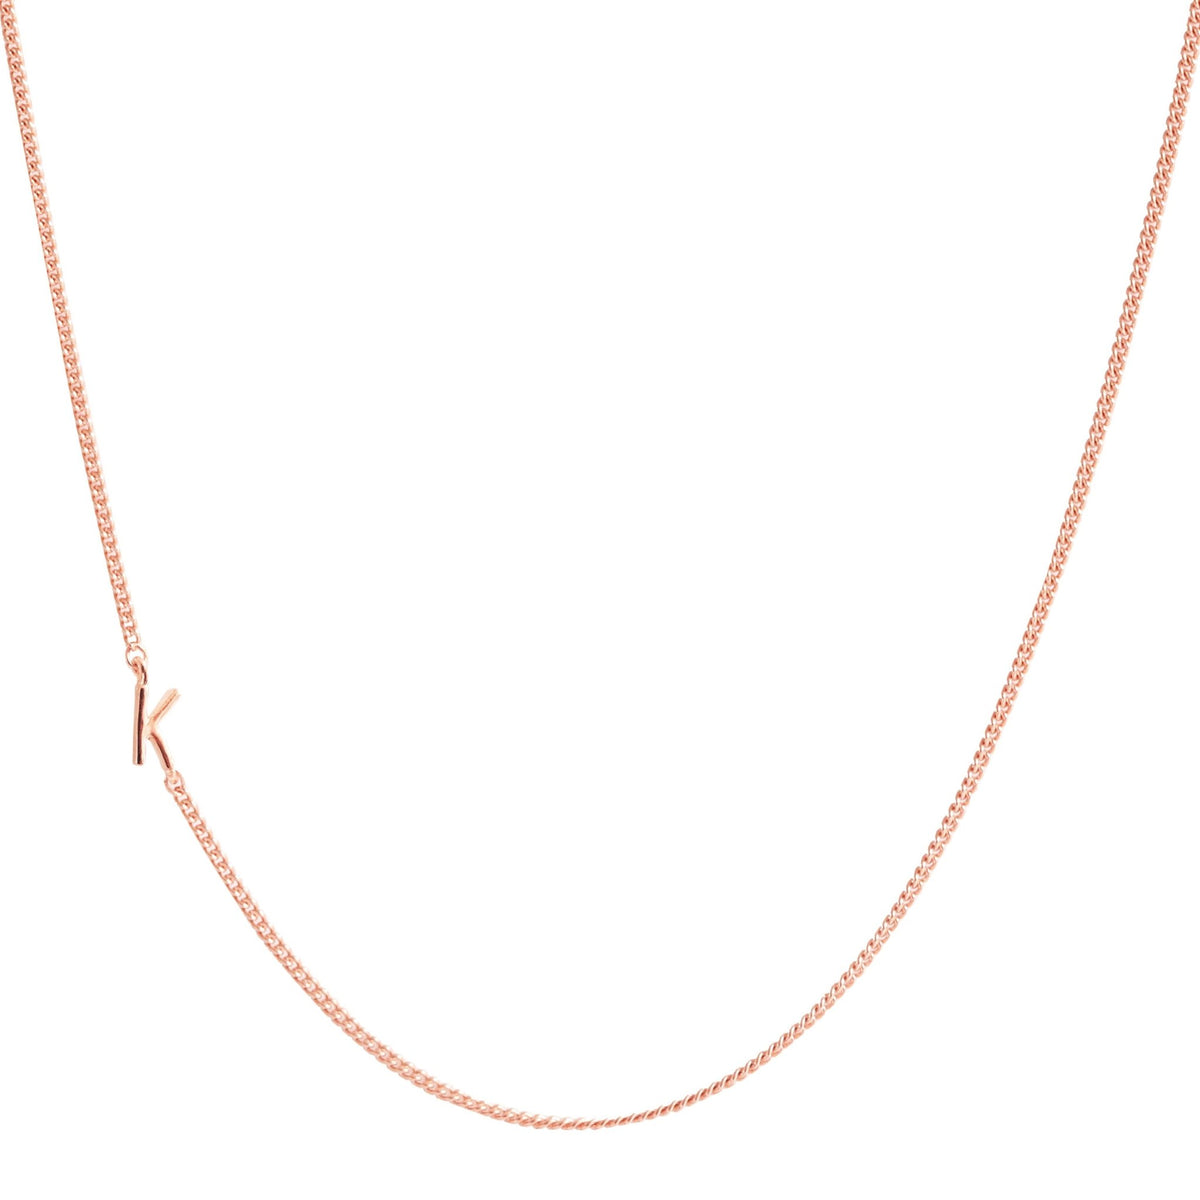 NOTABLE OFFSET INITIAL NECKLACE - K - GOLD, ROSE GOLD, OR SILVER - SO PRETTY CARA COTTER